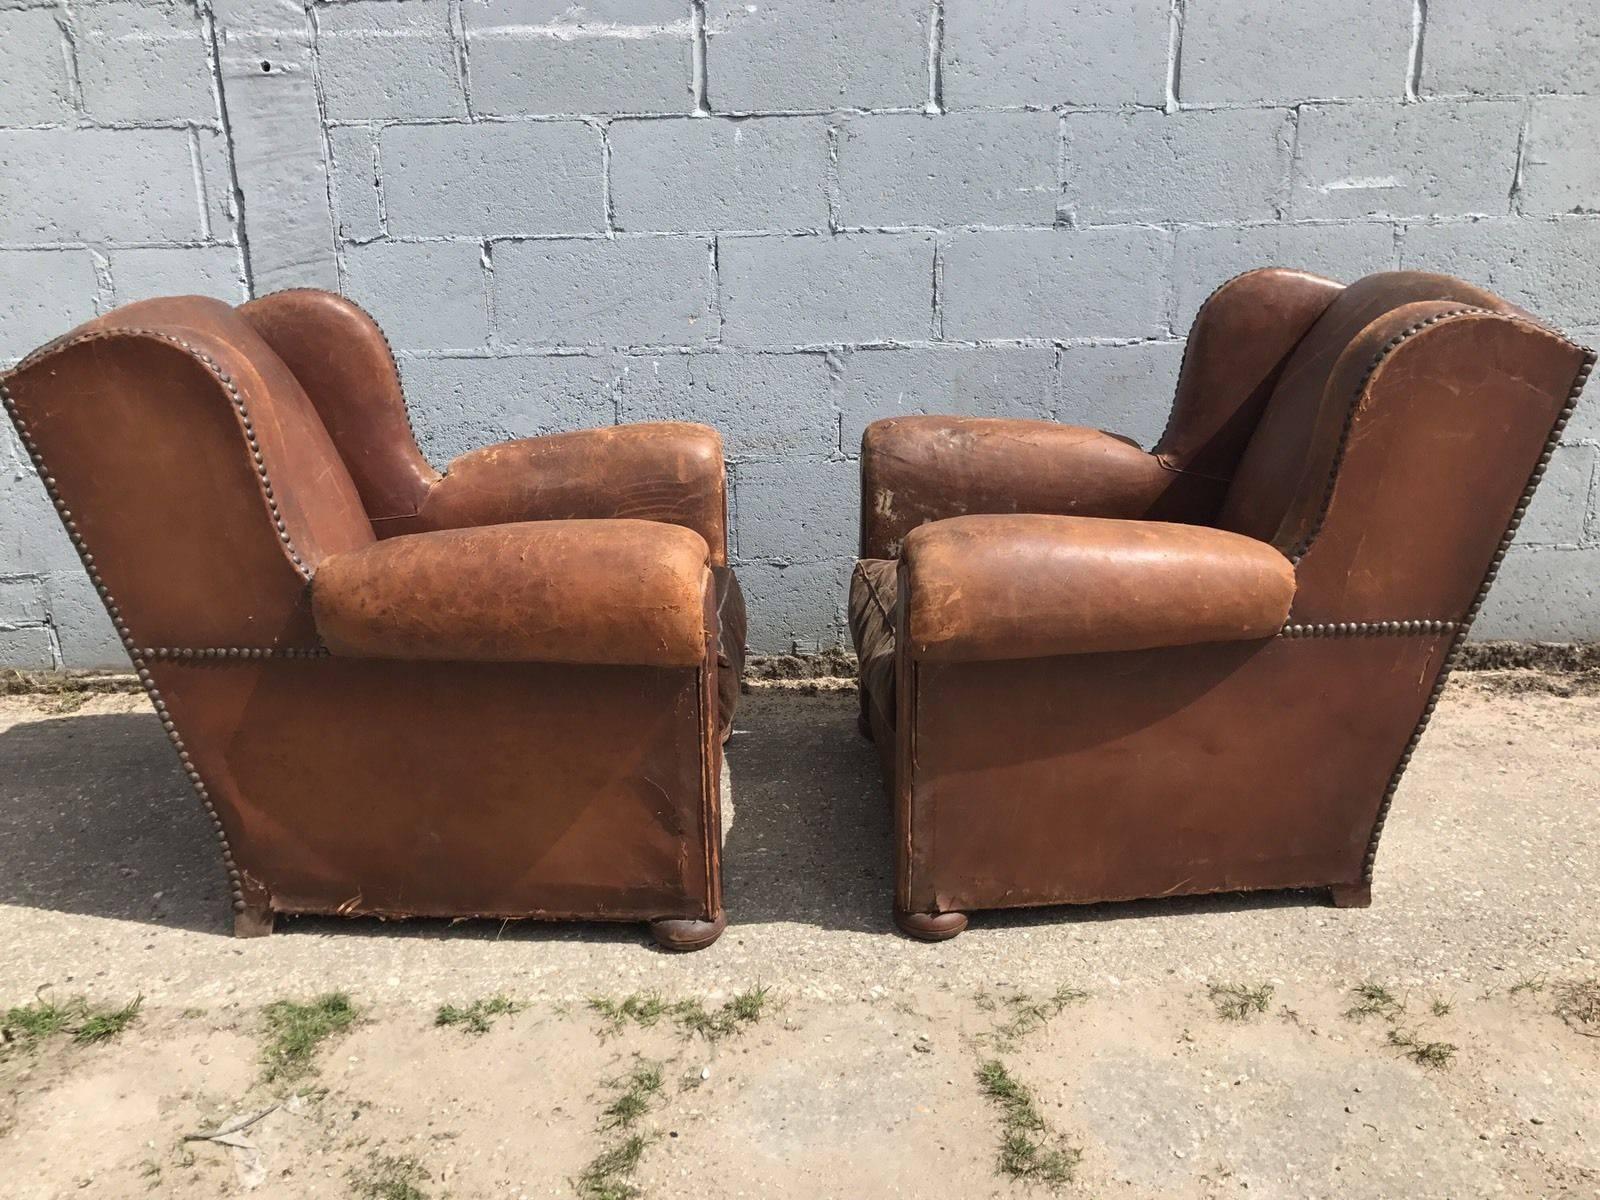 Beautiful French Leather Antique Club Chairs, Industrial, Vintage X2 In Fair Condition For Sale In Lingfield, West Sussex